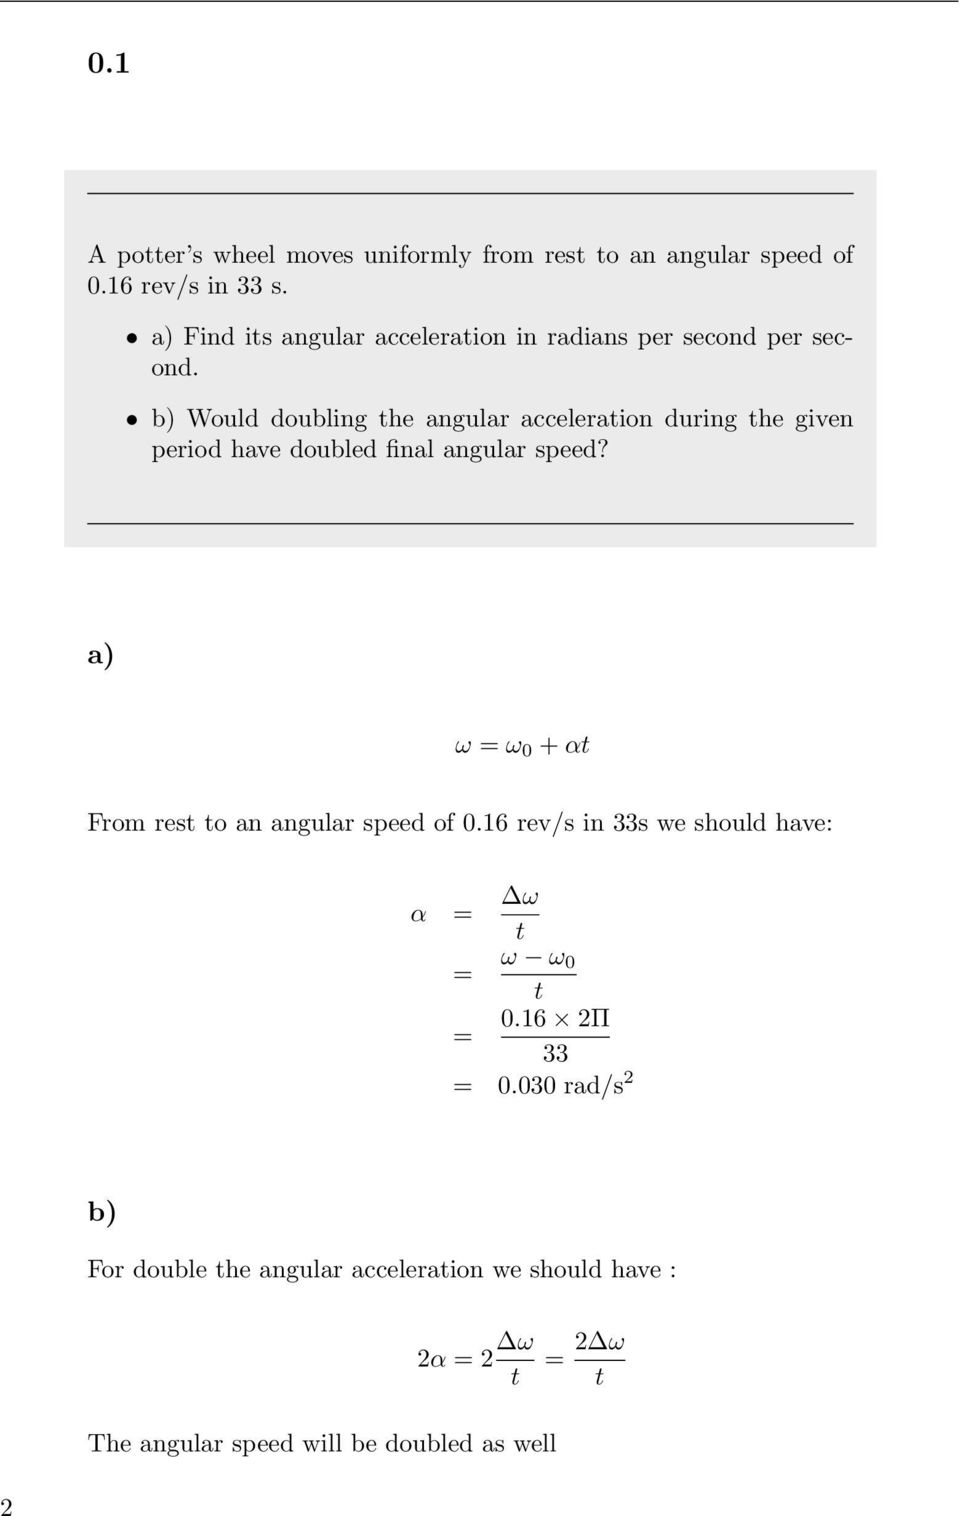 b) Would doubling the angular acceleration during the given period have doubled final angular speed?